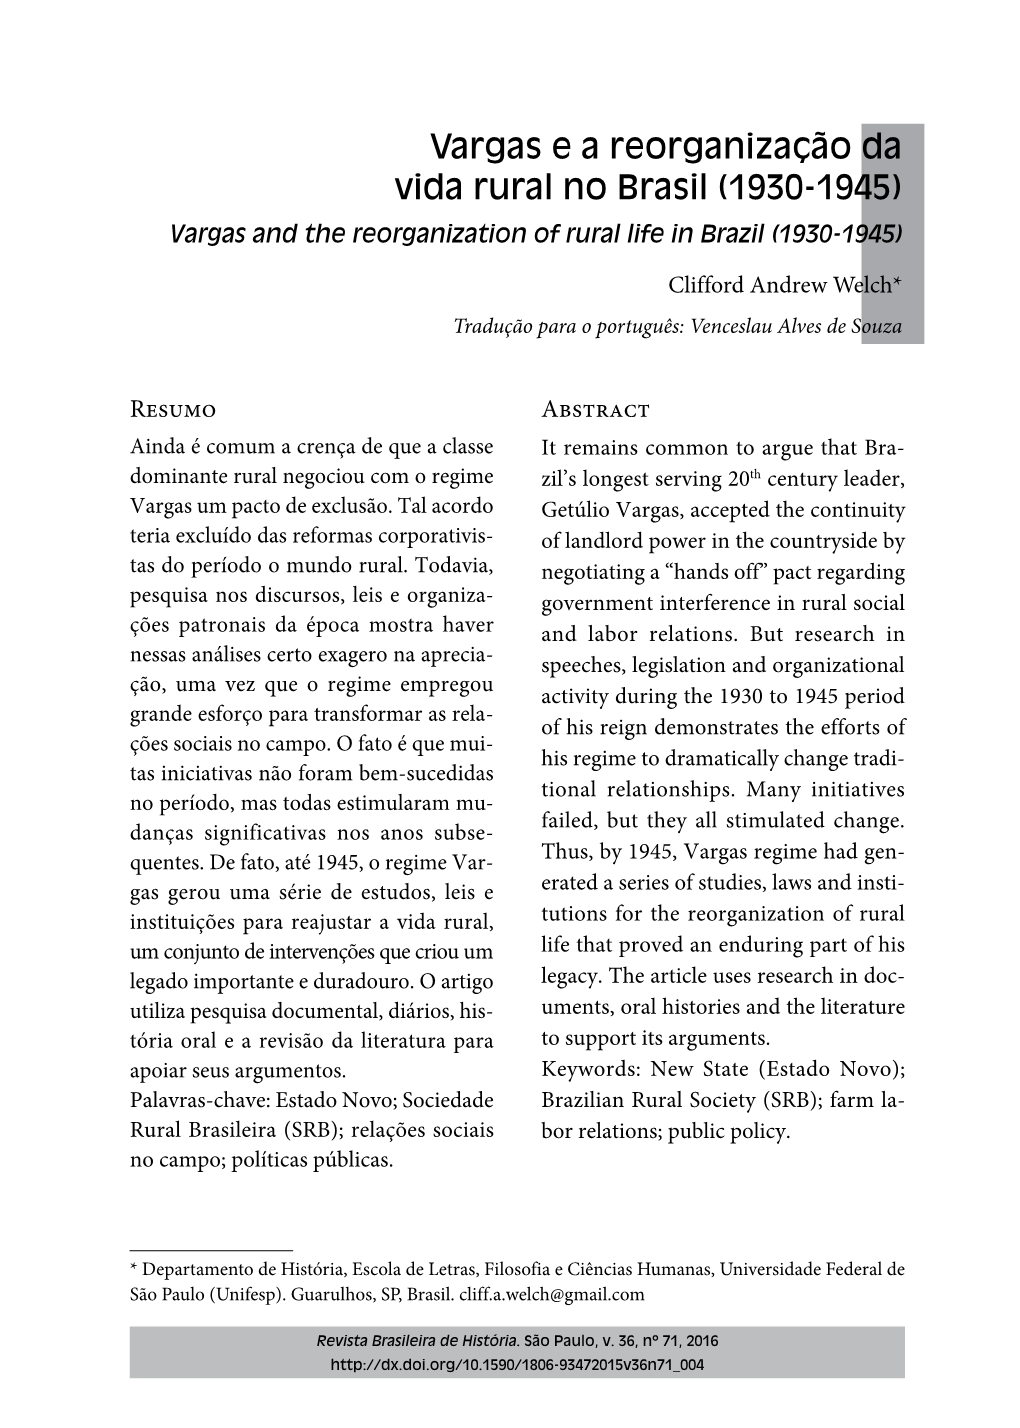 Vargas and the Reorganization of Rural Life in Brazil (1930-1945)